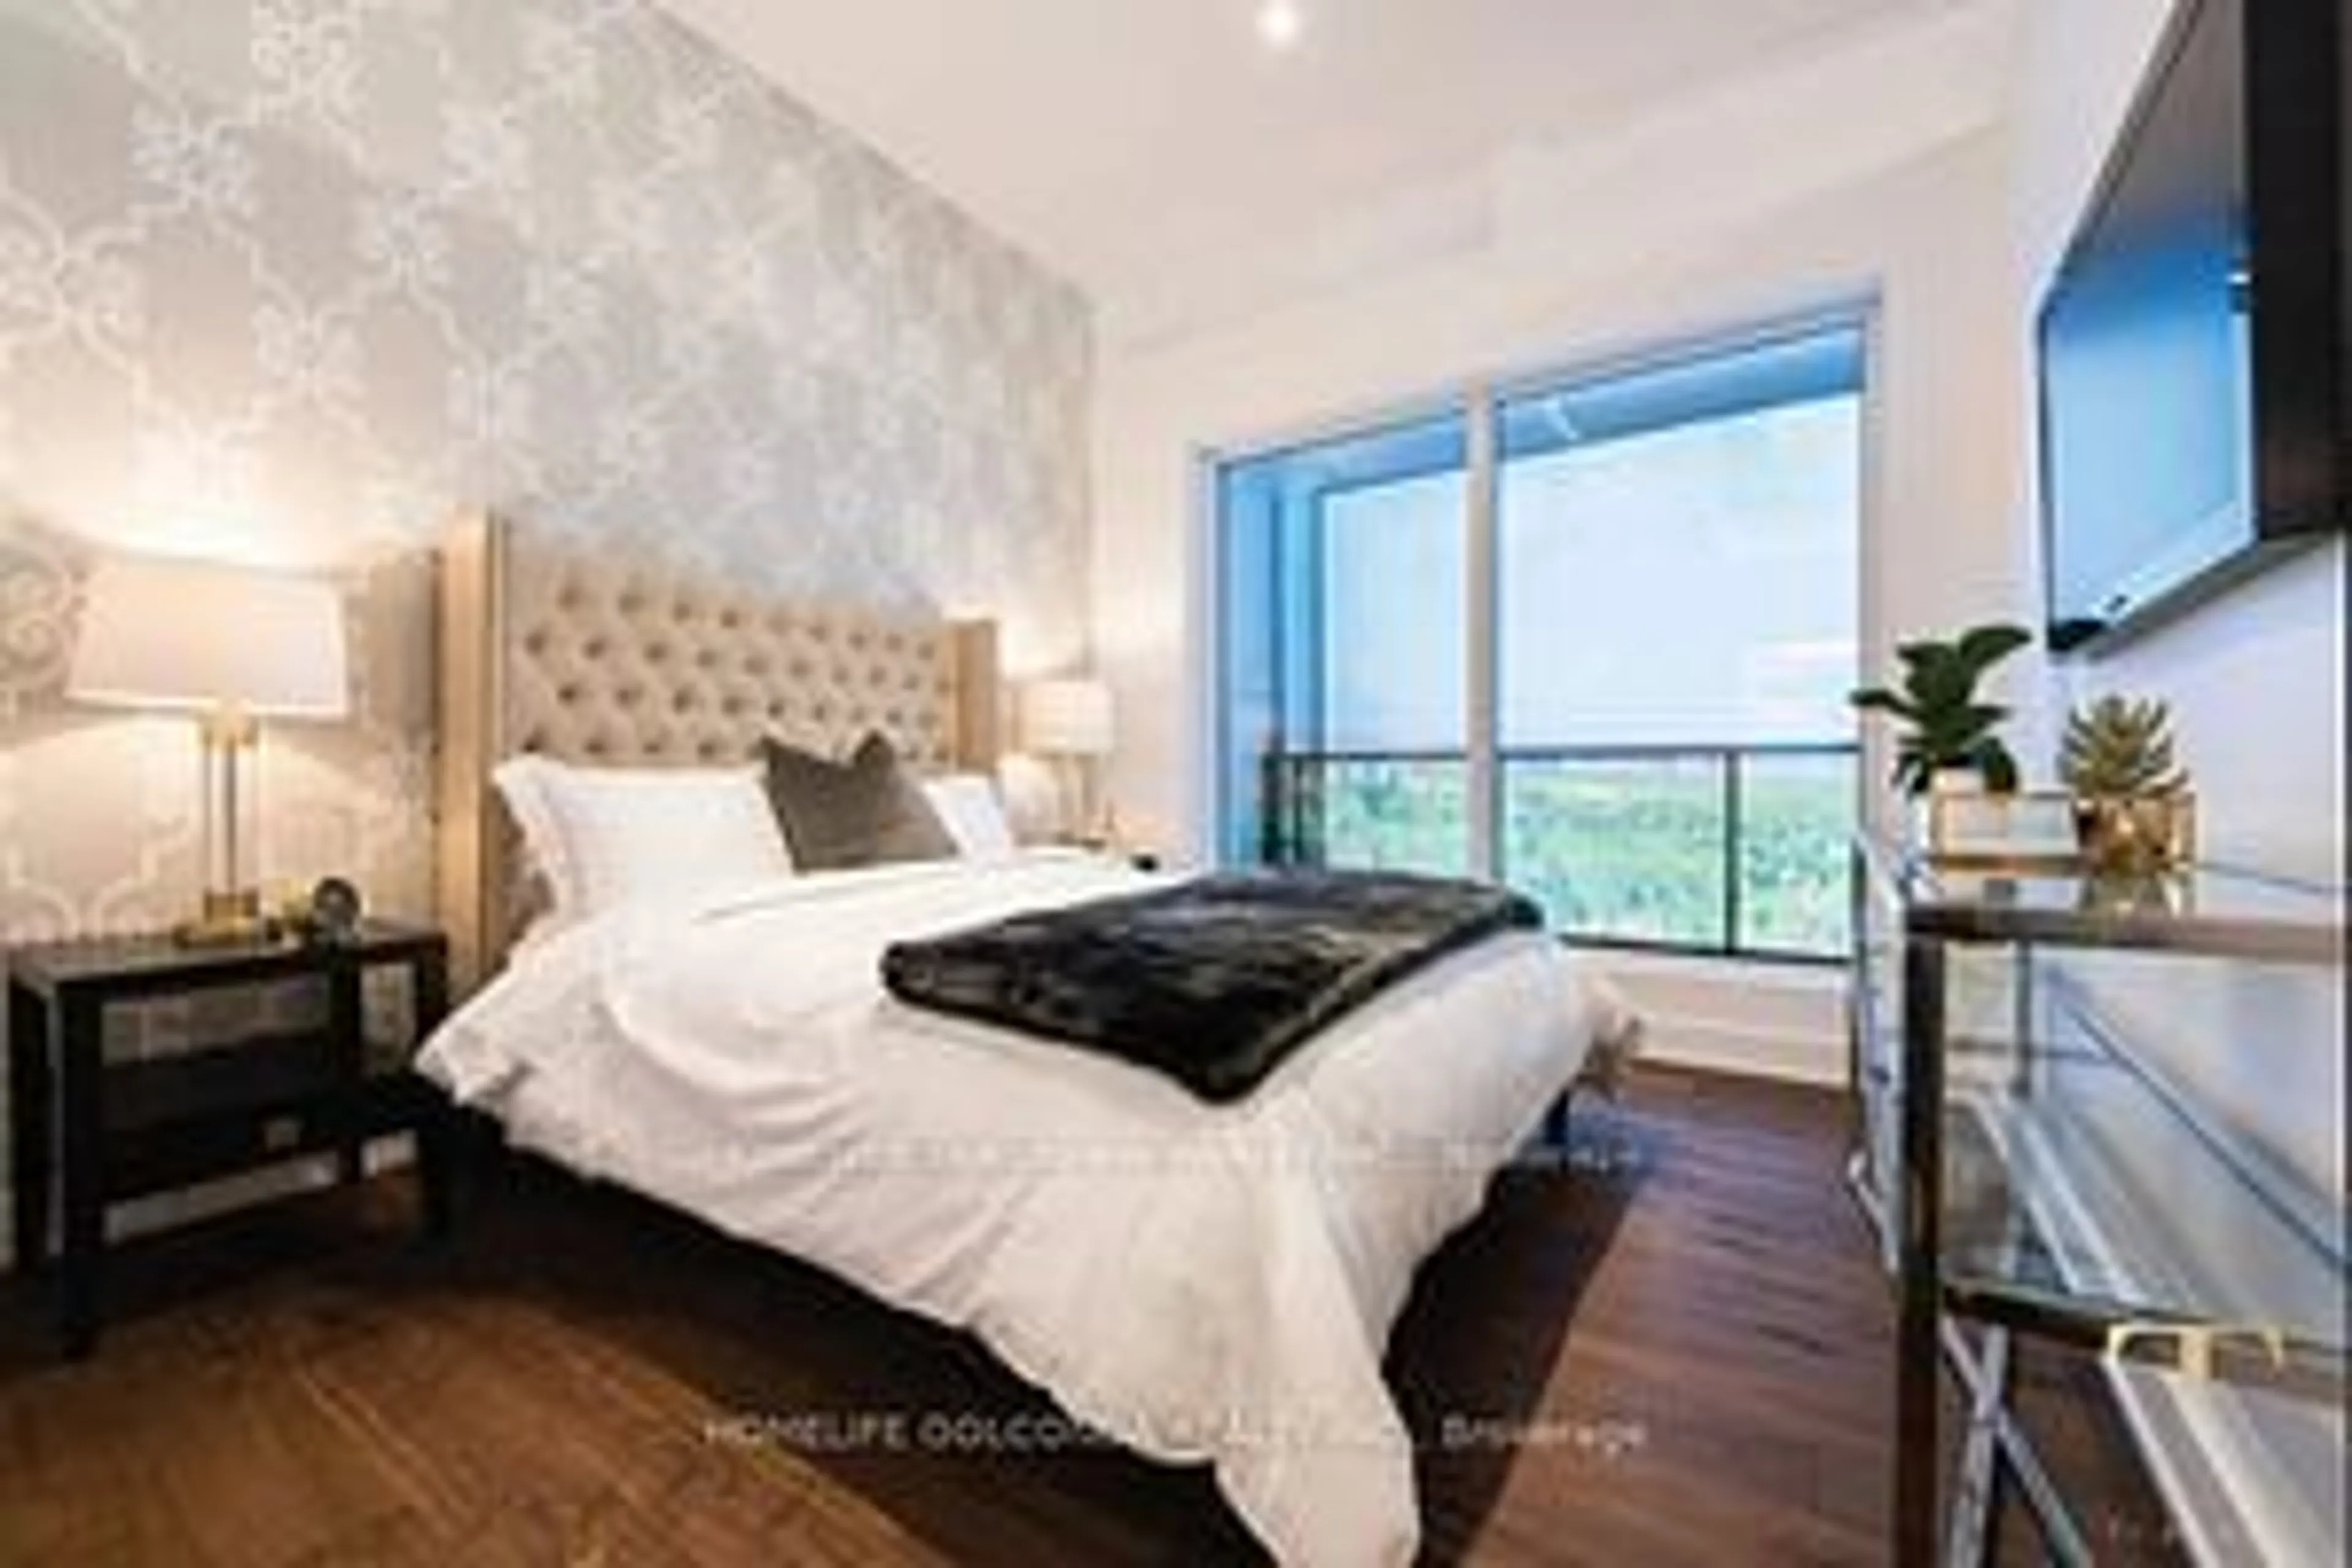 Bedroom for 8 Olympic Gdn Dr #S621, Toronto Ontario M2M 0B9